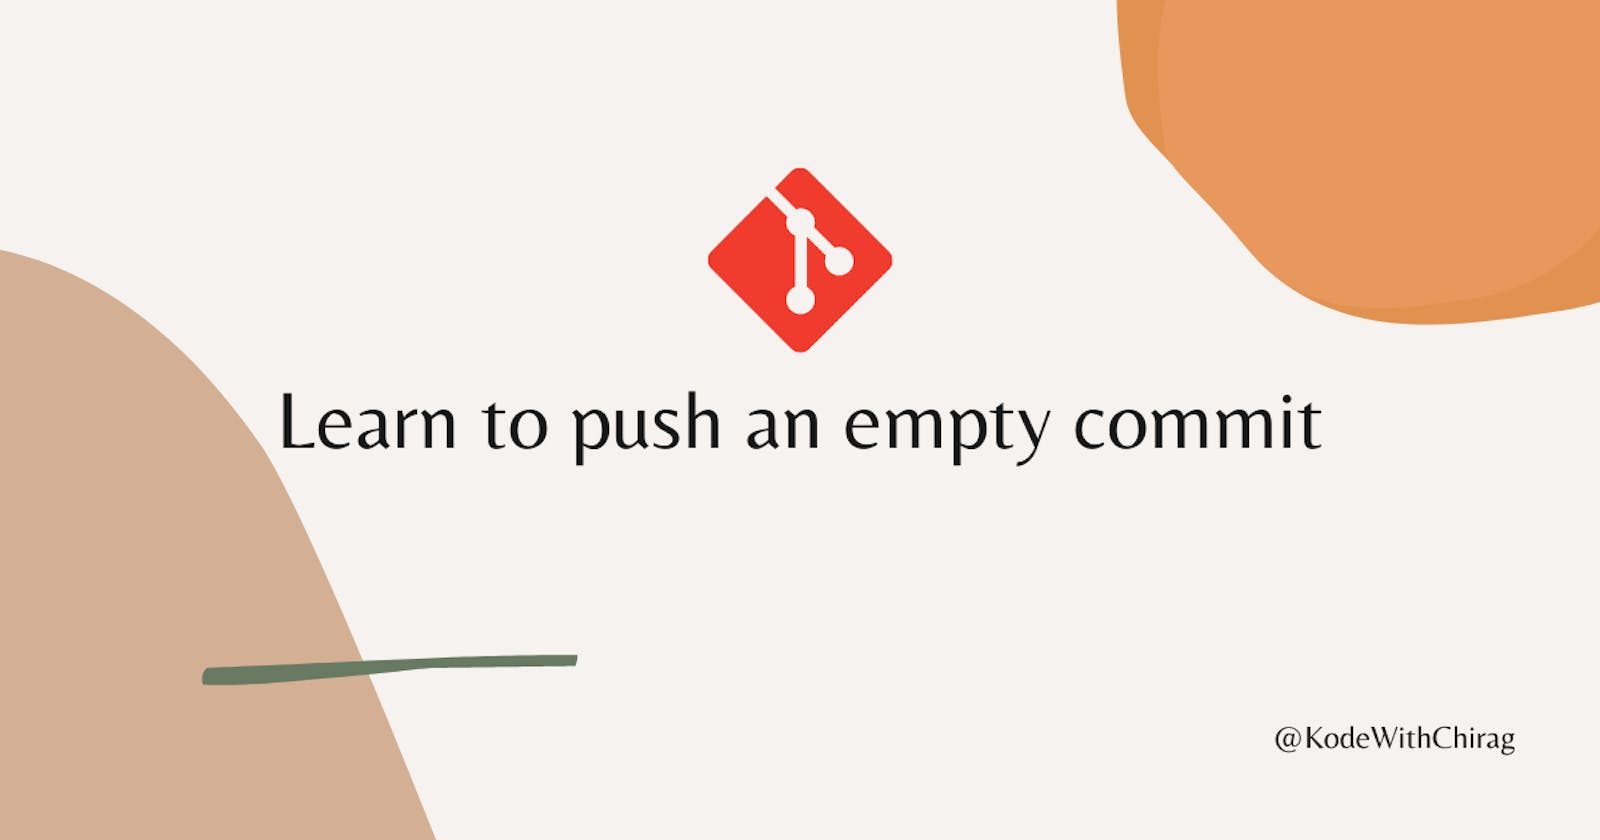 Learn to push an empty commit